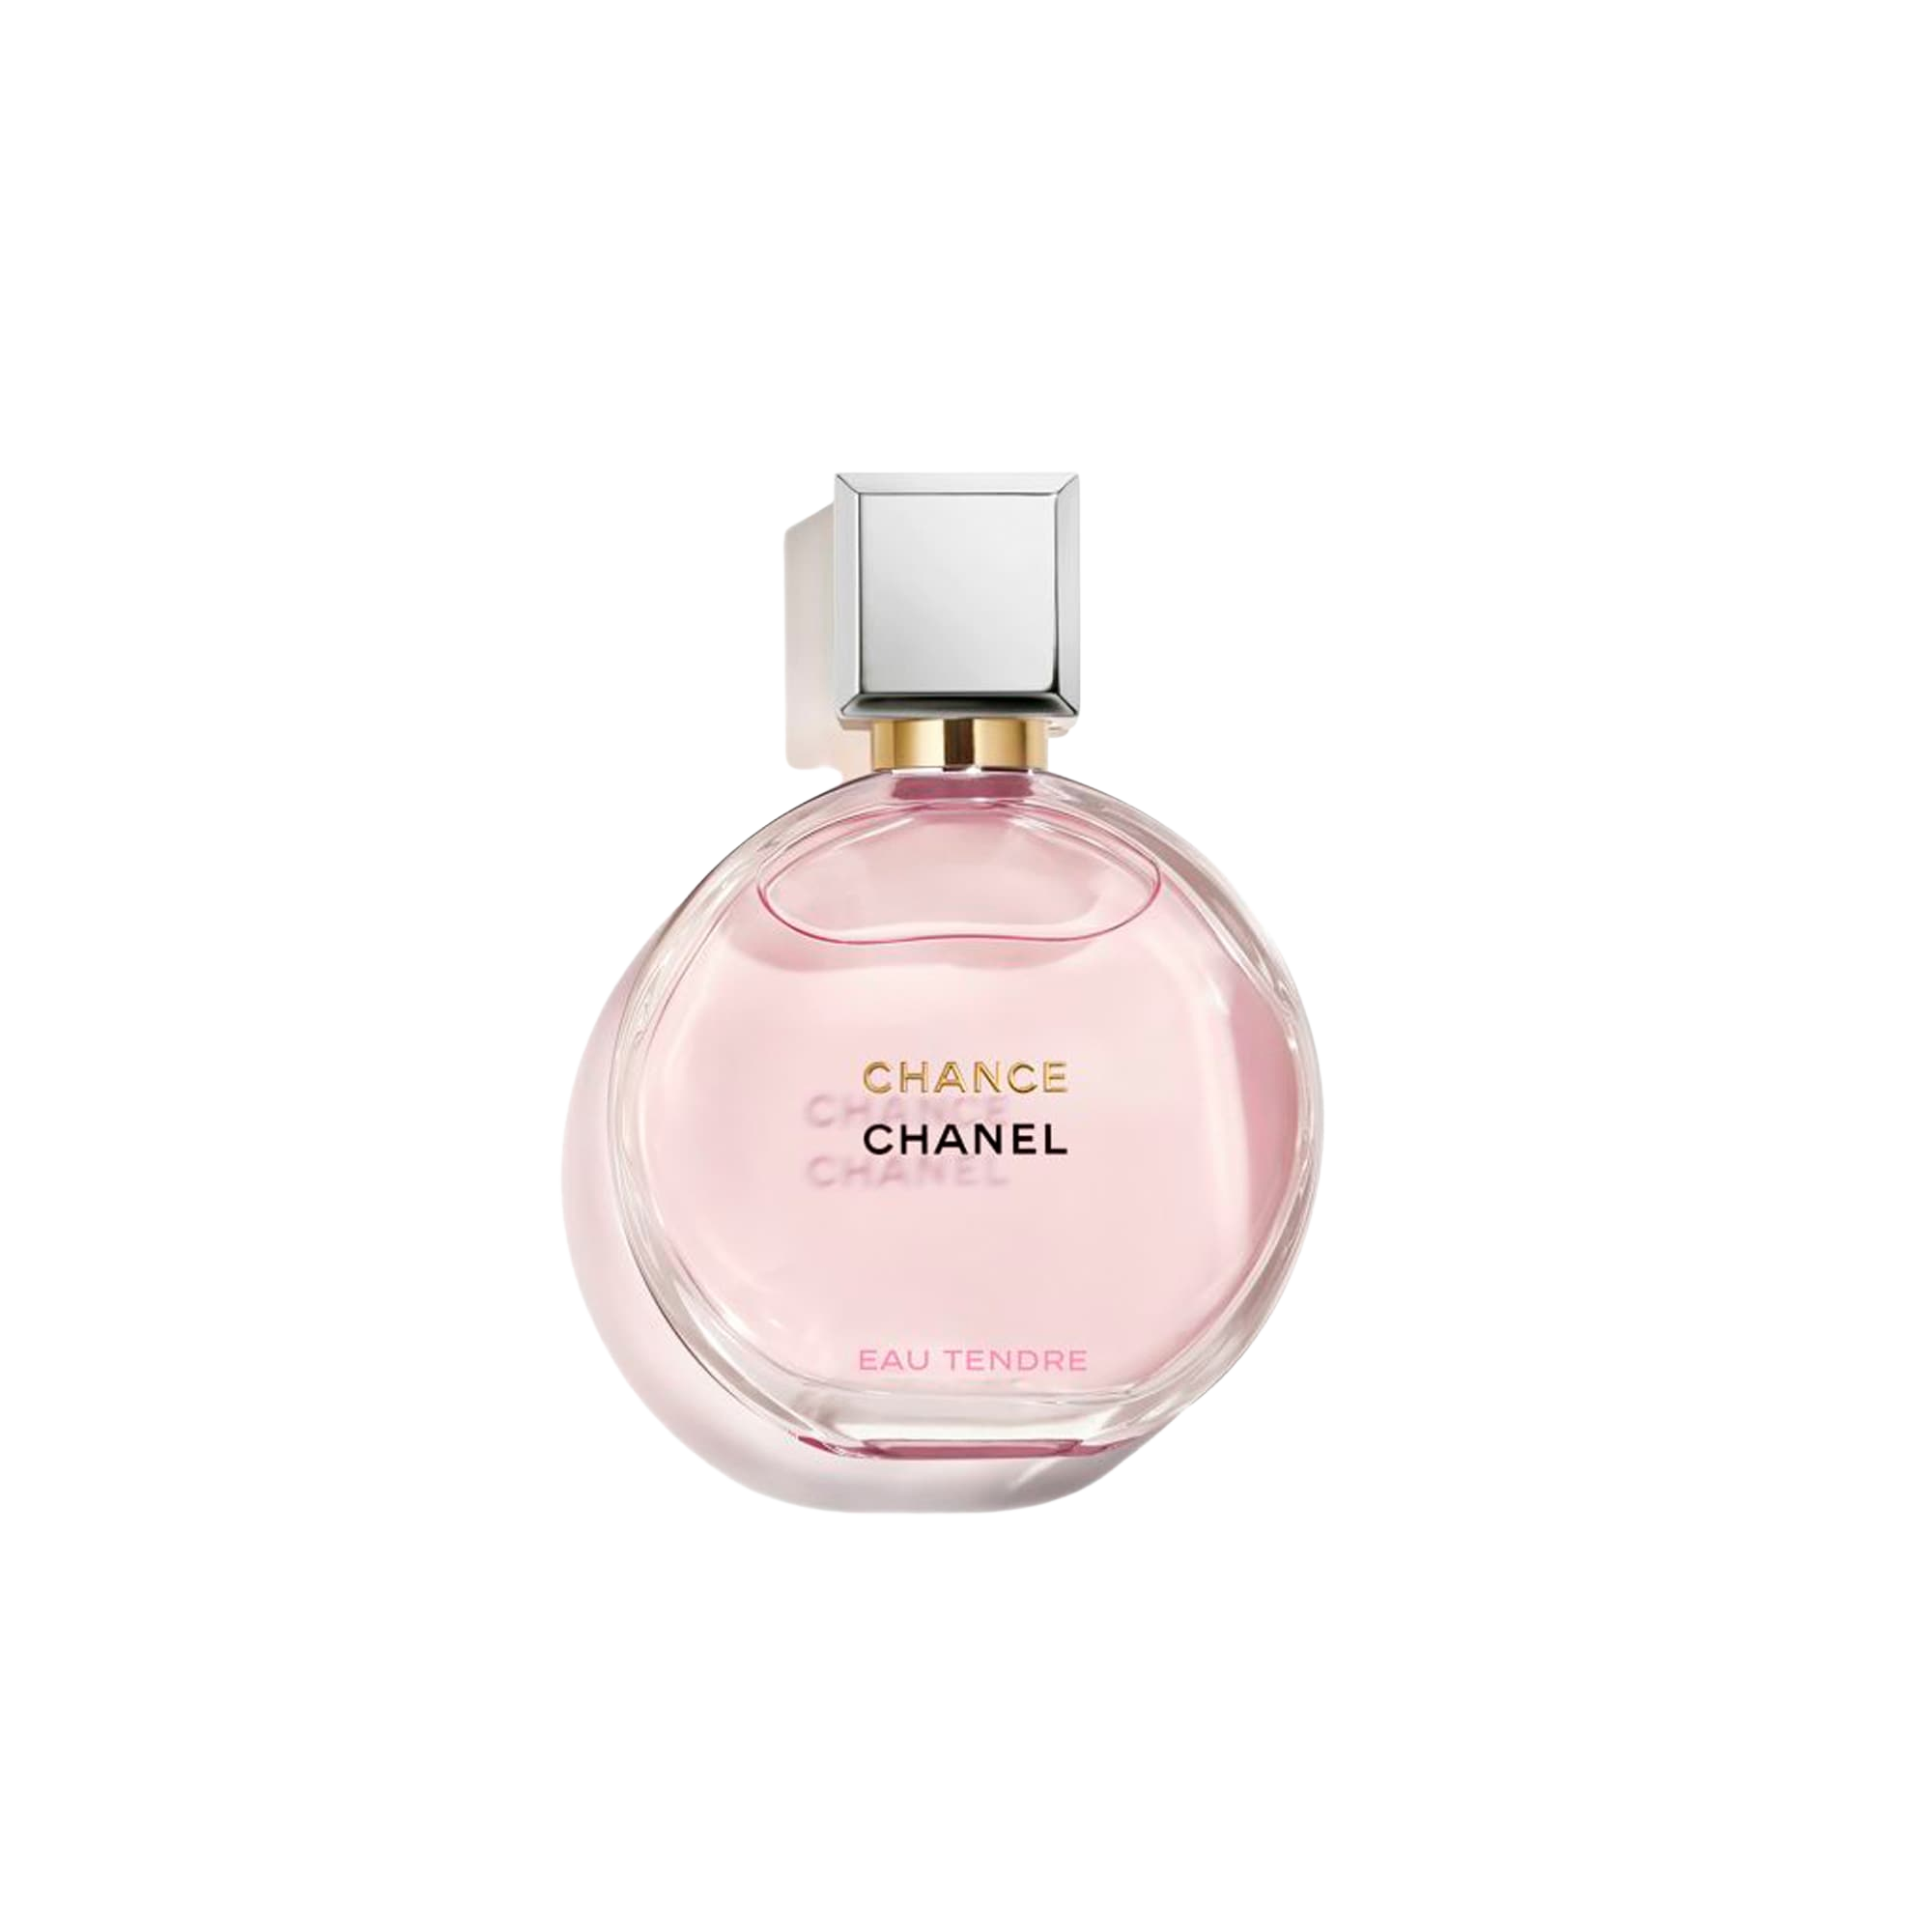 chance cologne chanel